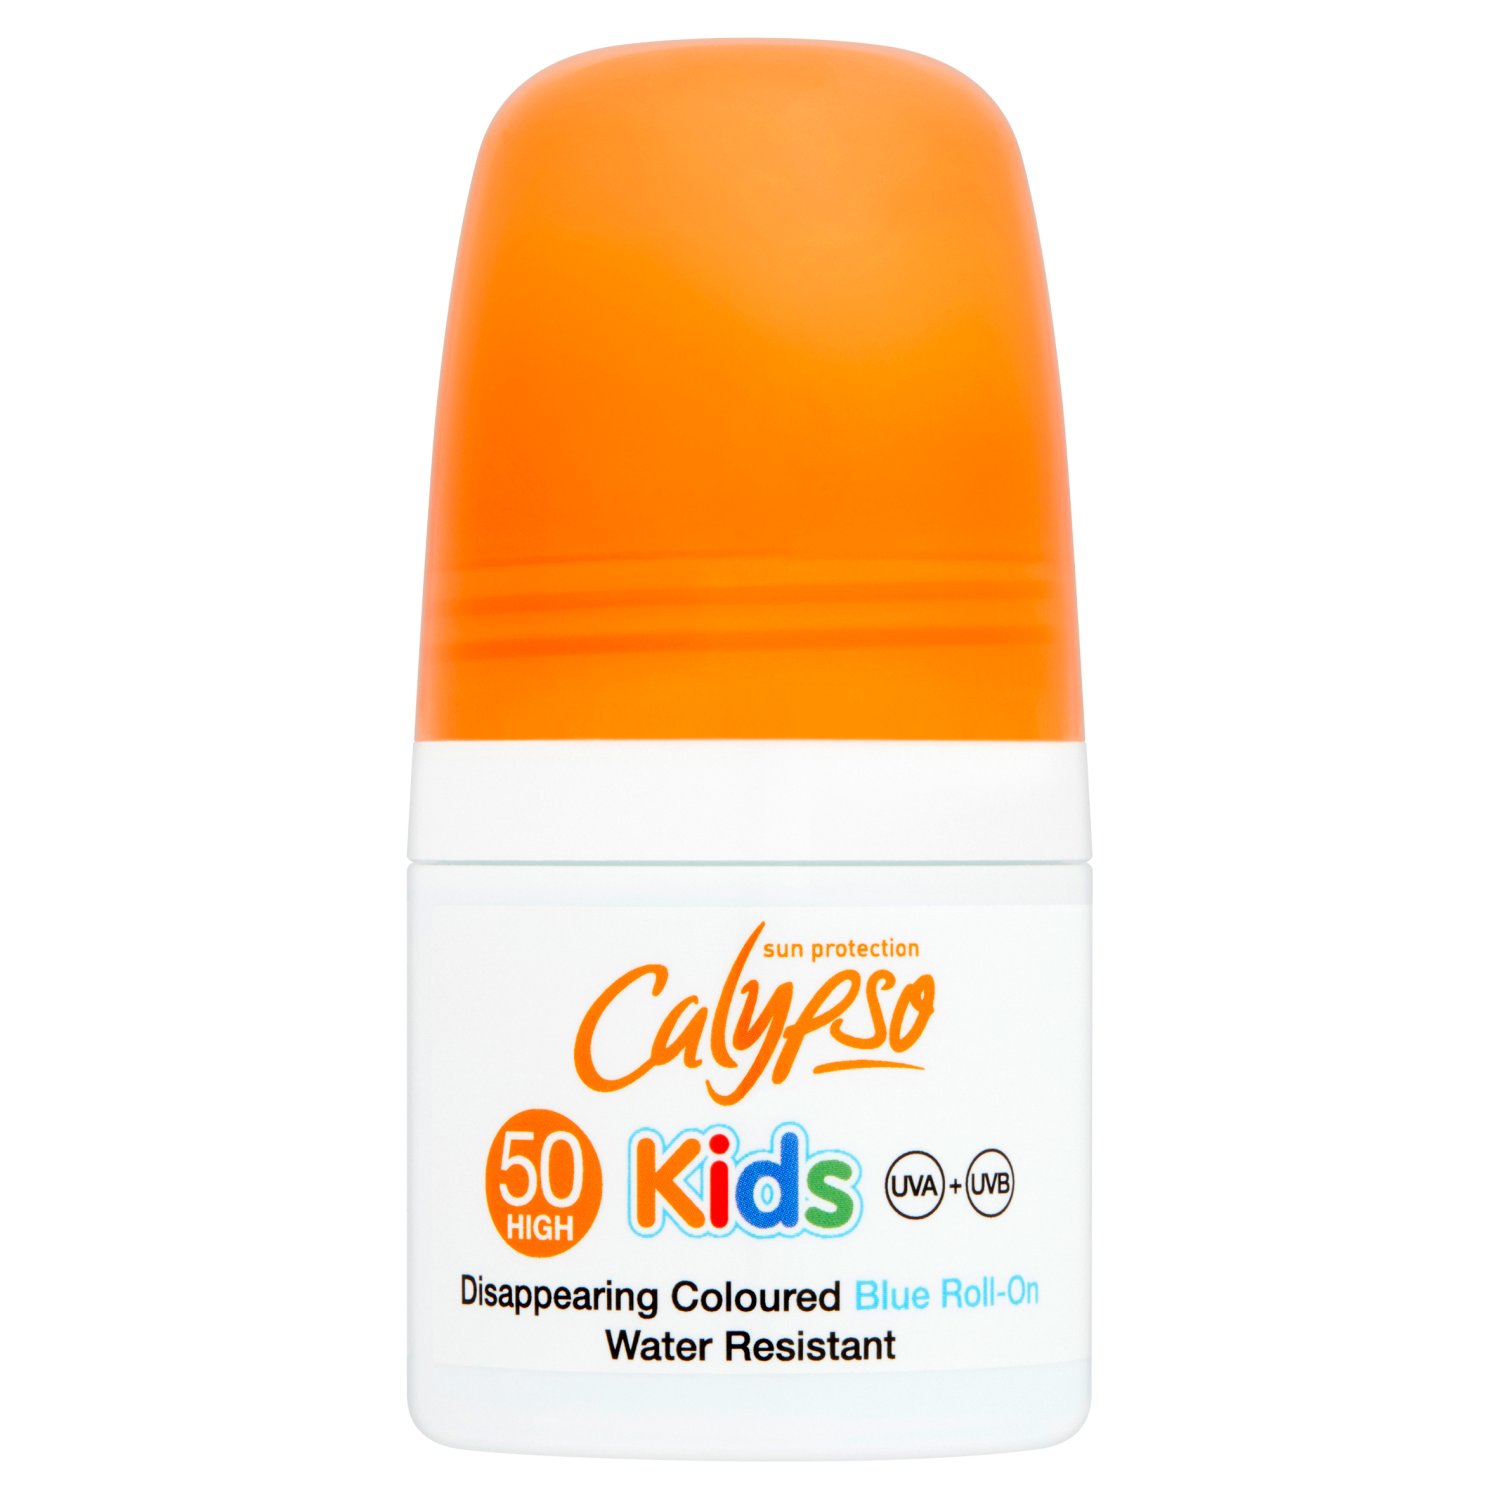 Calypso Sun Protection Kids Disappearing Coloured Blue Roll-On SPF50 (50 ml)